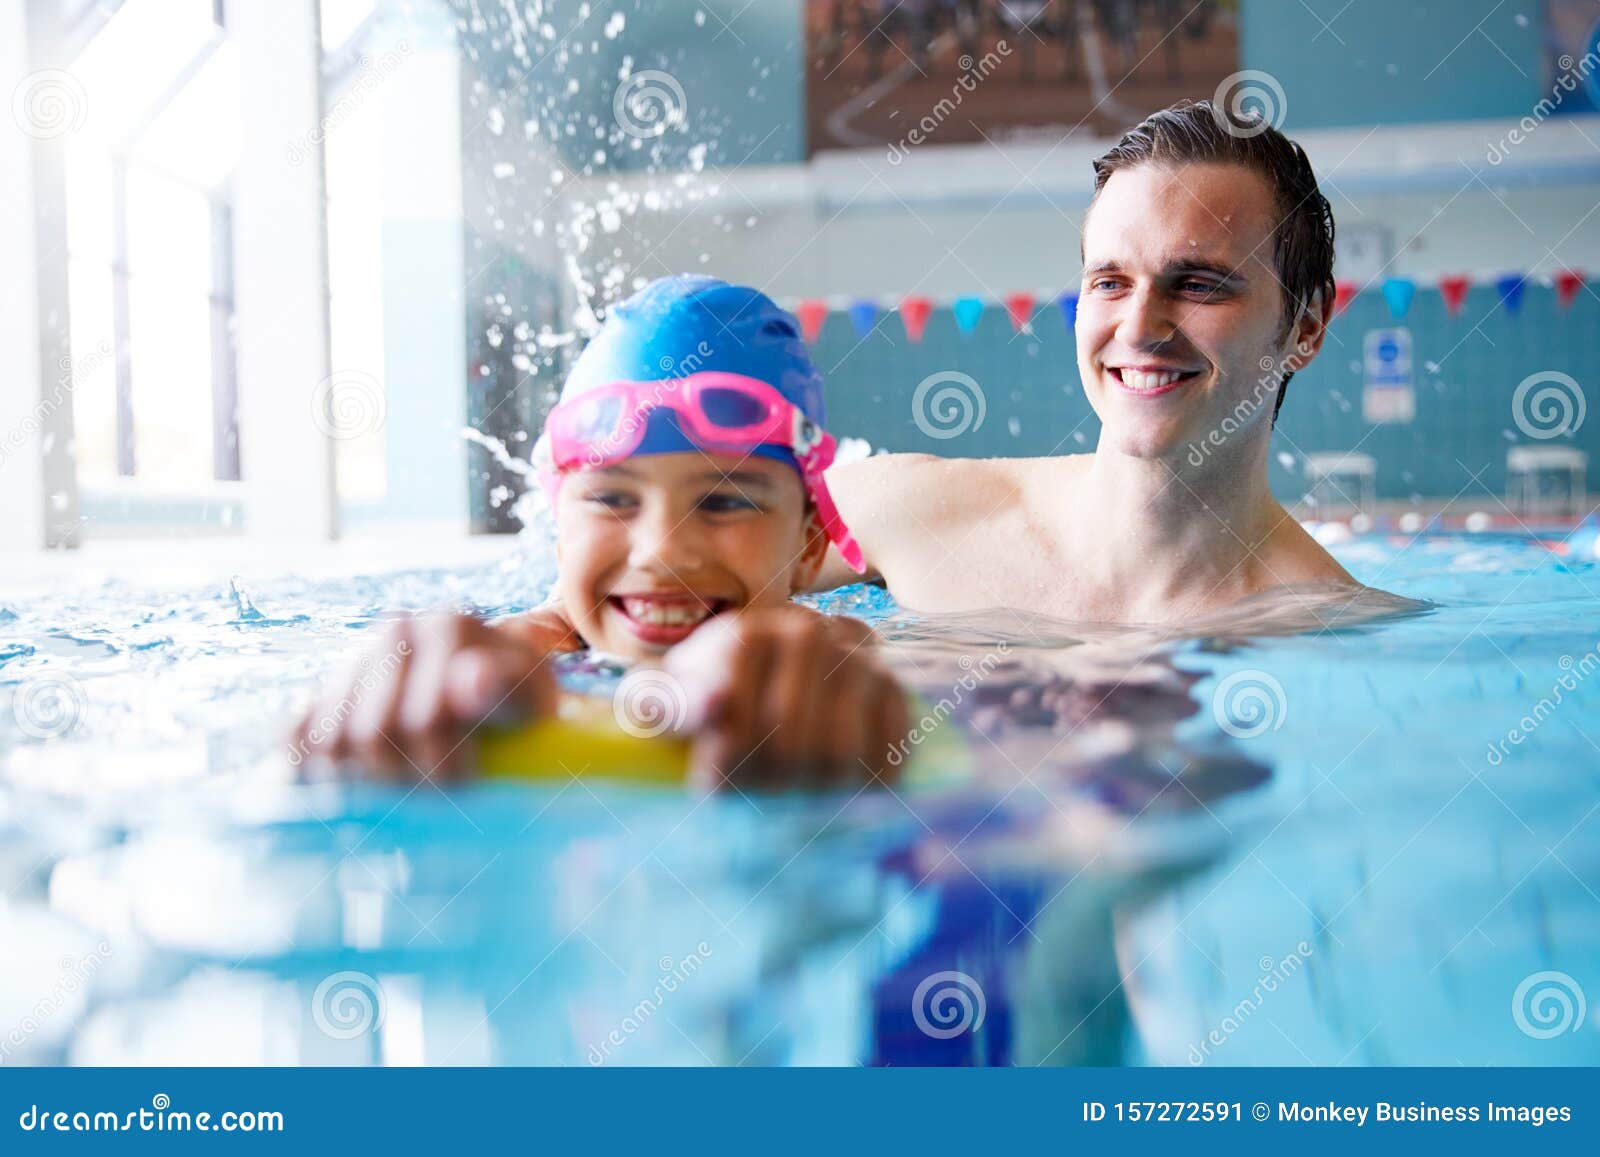 male swimming coach giving girl holding float one to one lesson in pool